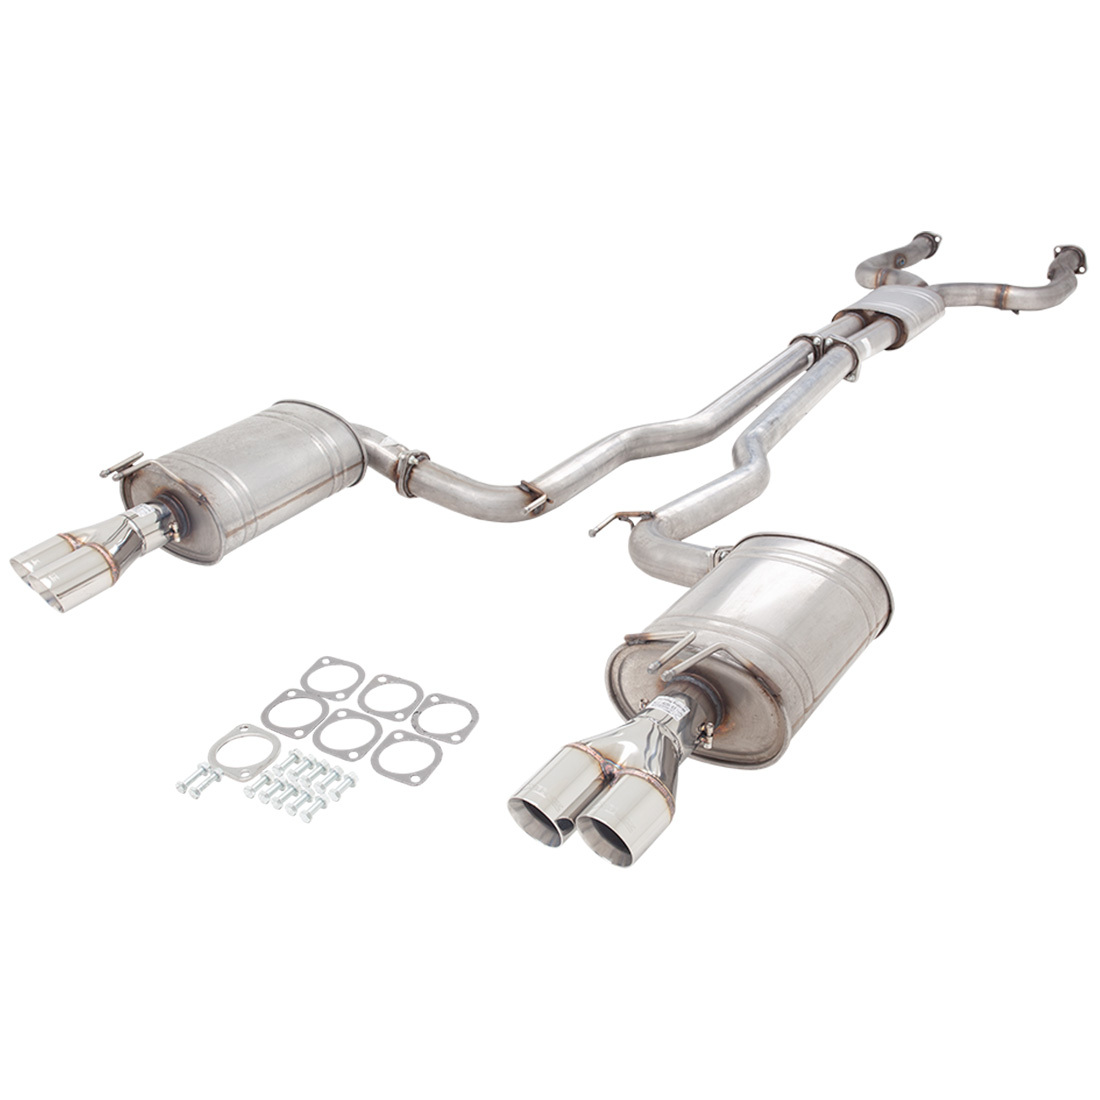 Holden Commodore VE VF V8 Commodore Sedan/Wagon 2.5" Catback 409 Stainless Steel Exhaust System image